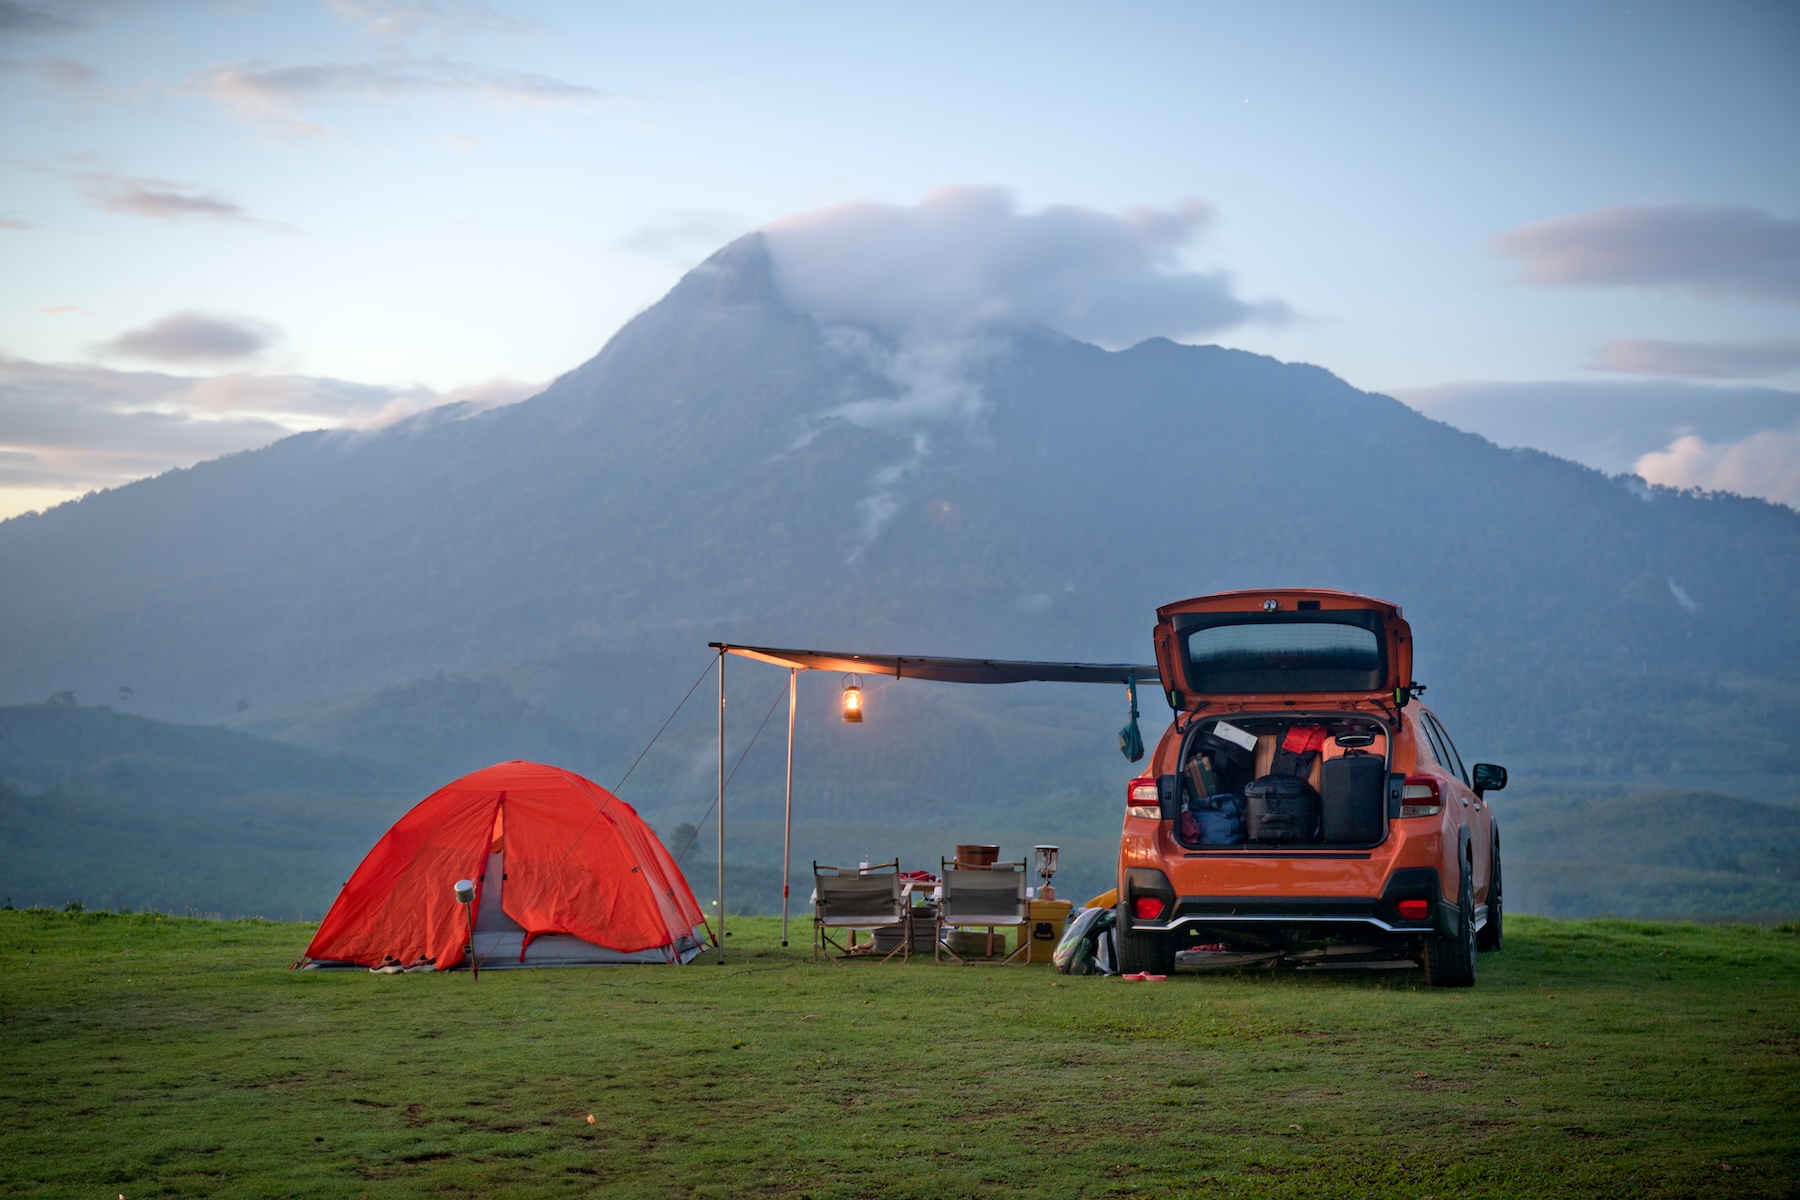 Camping scene with a car and tent featuring a mountain background